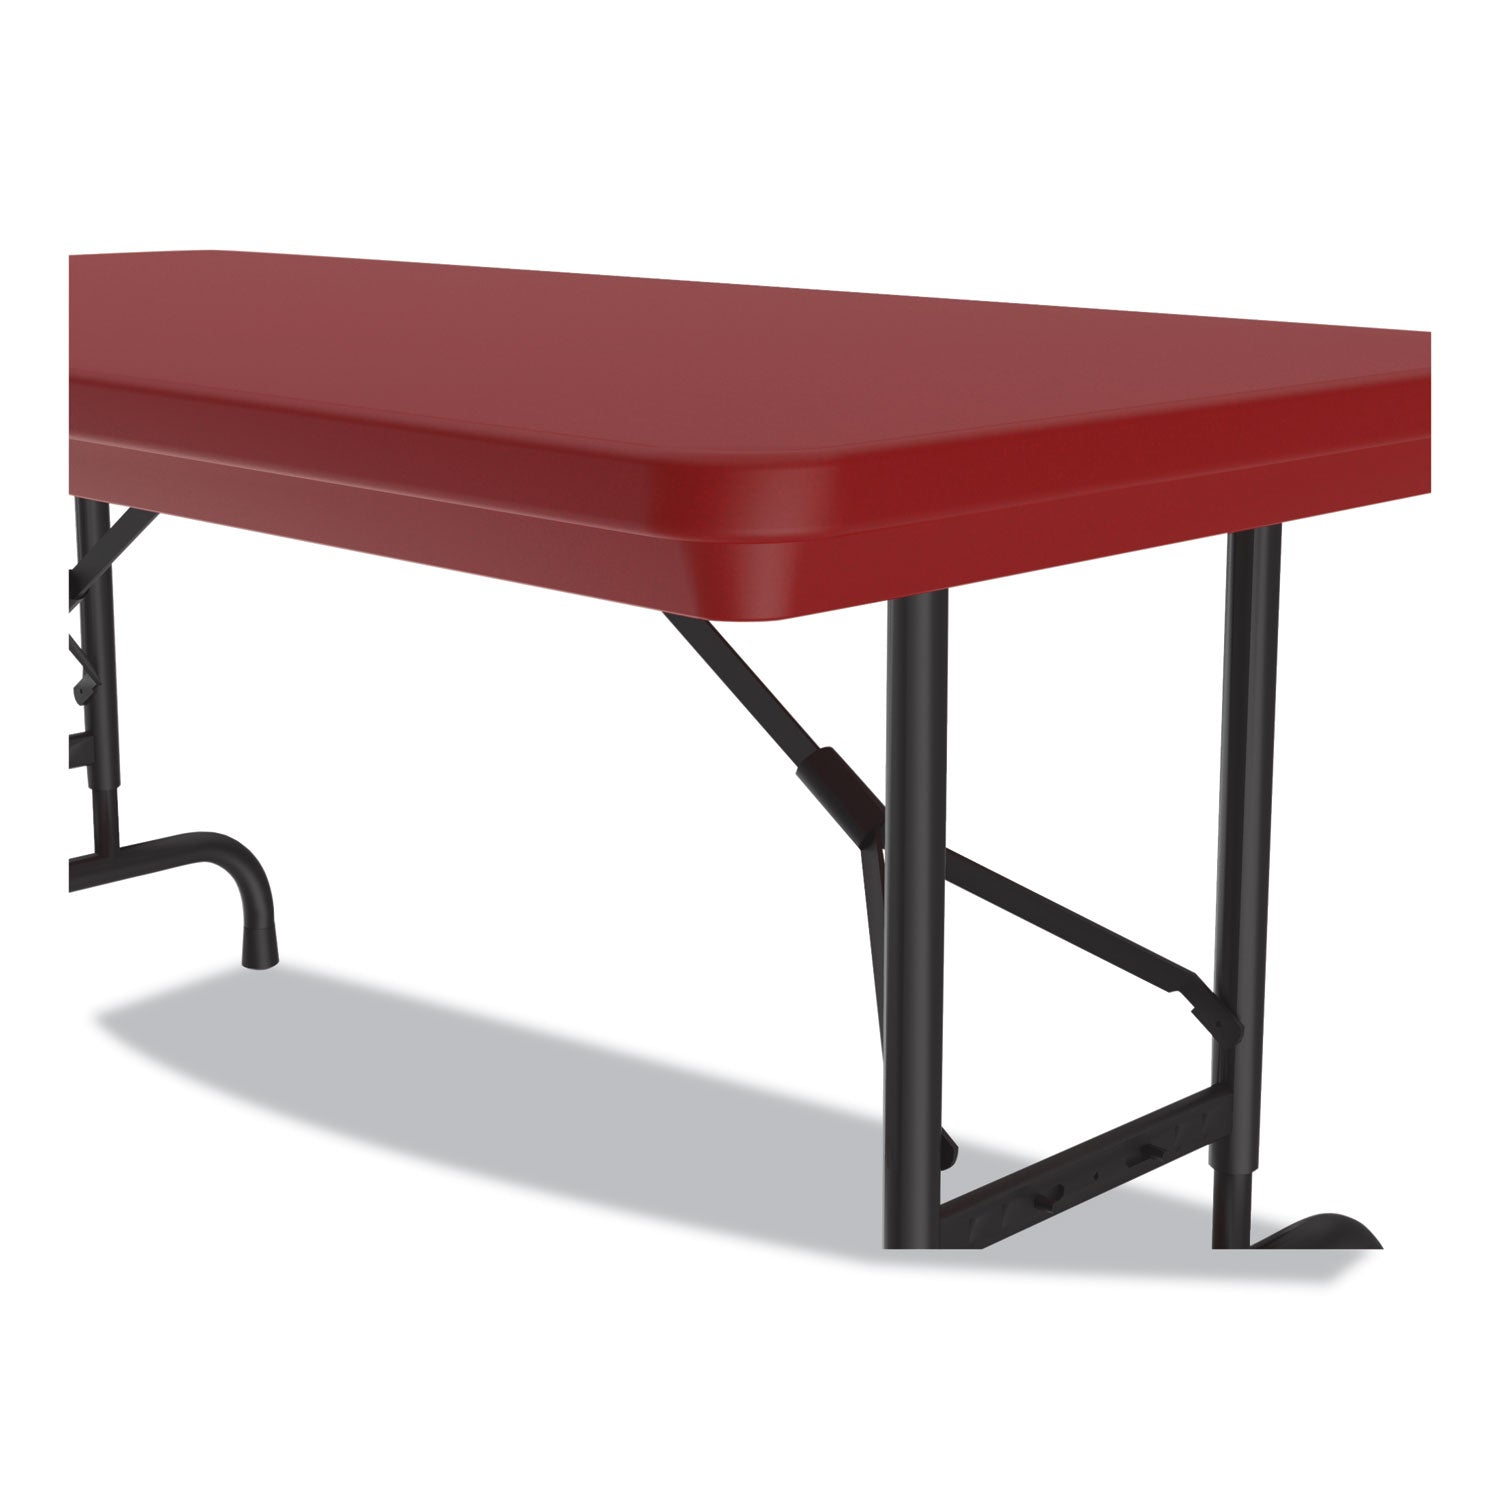 adjustable-folding-table-rectangular-48-x-24-x-22-to-32-red-top-black-legs-4-pallet-ships-in-4-6-business-days_crlra2448254p - 8